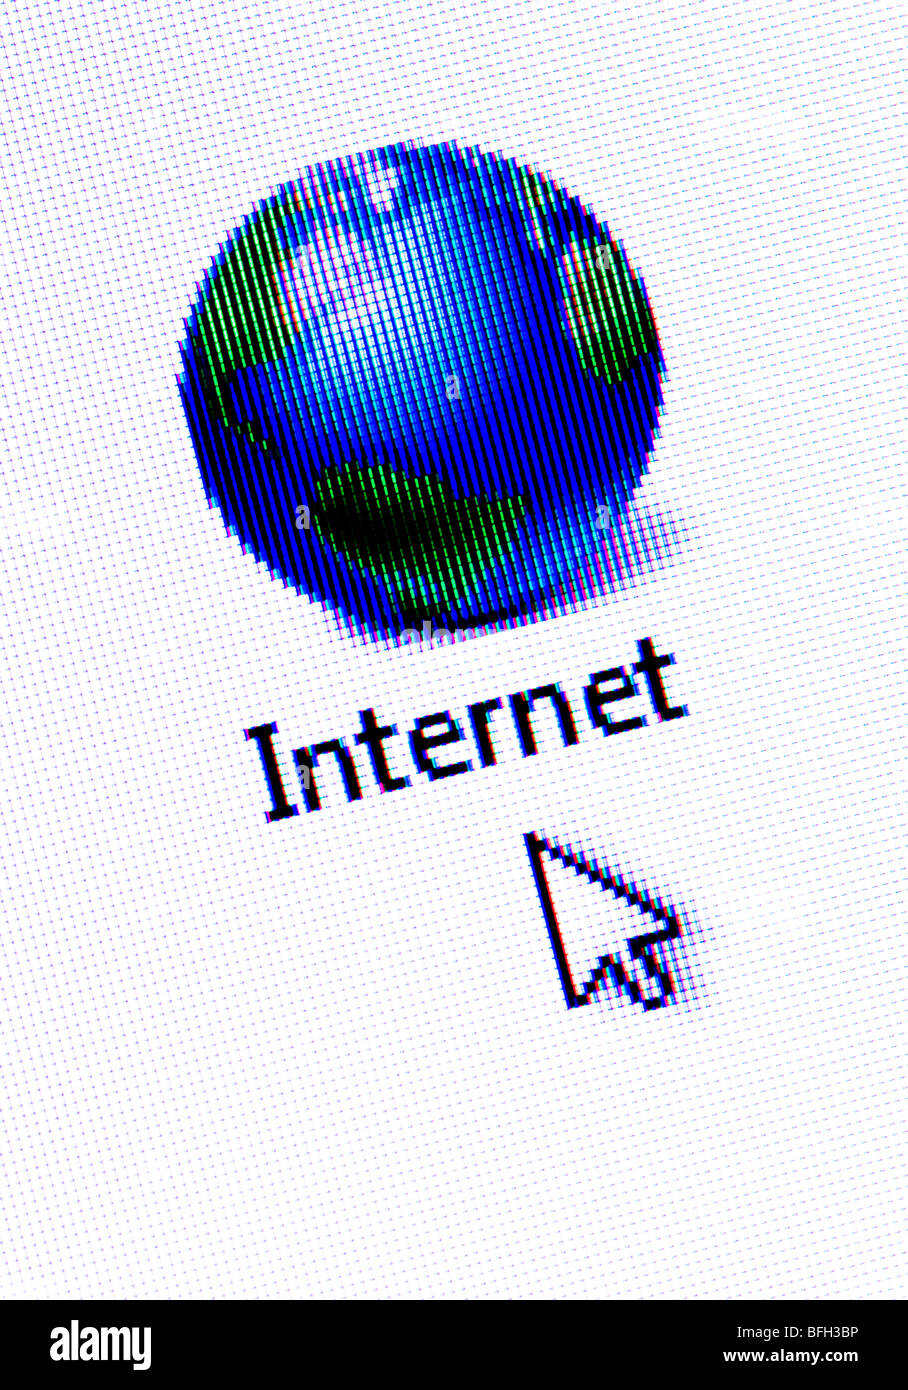 Macro screenshot of the internet connection icon and cursor / arrow on a computer screen. Stock Photo